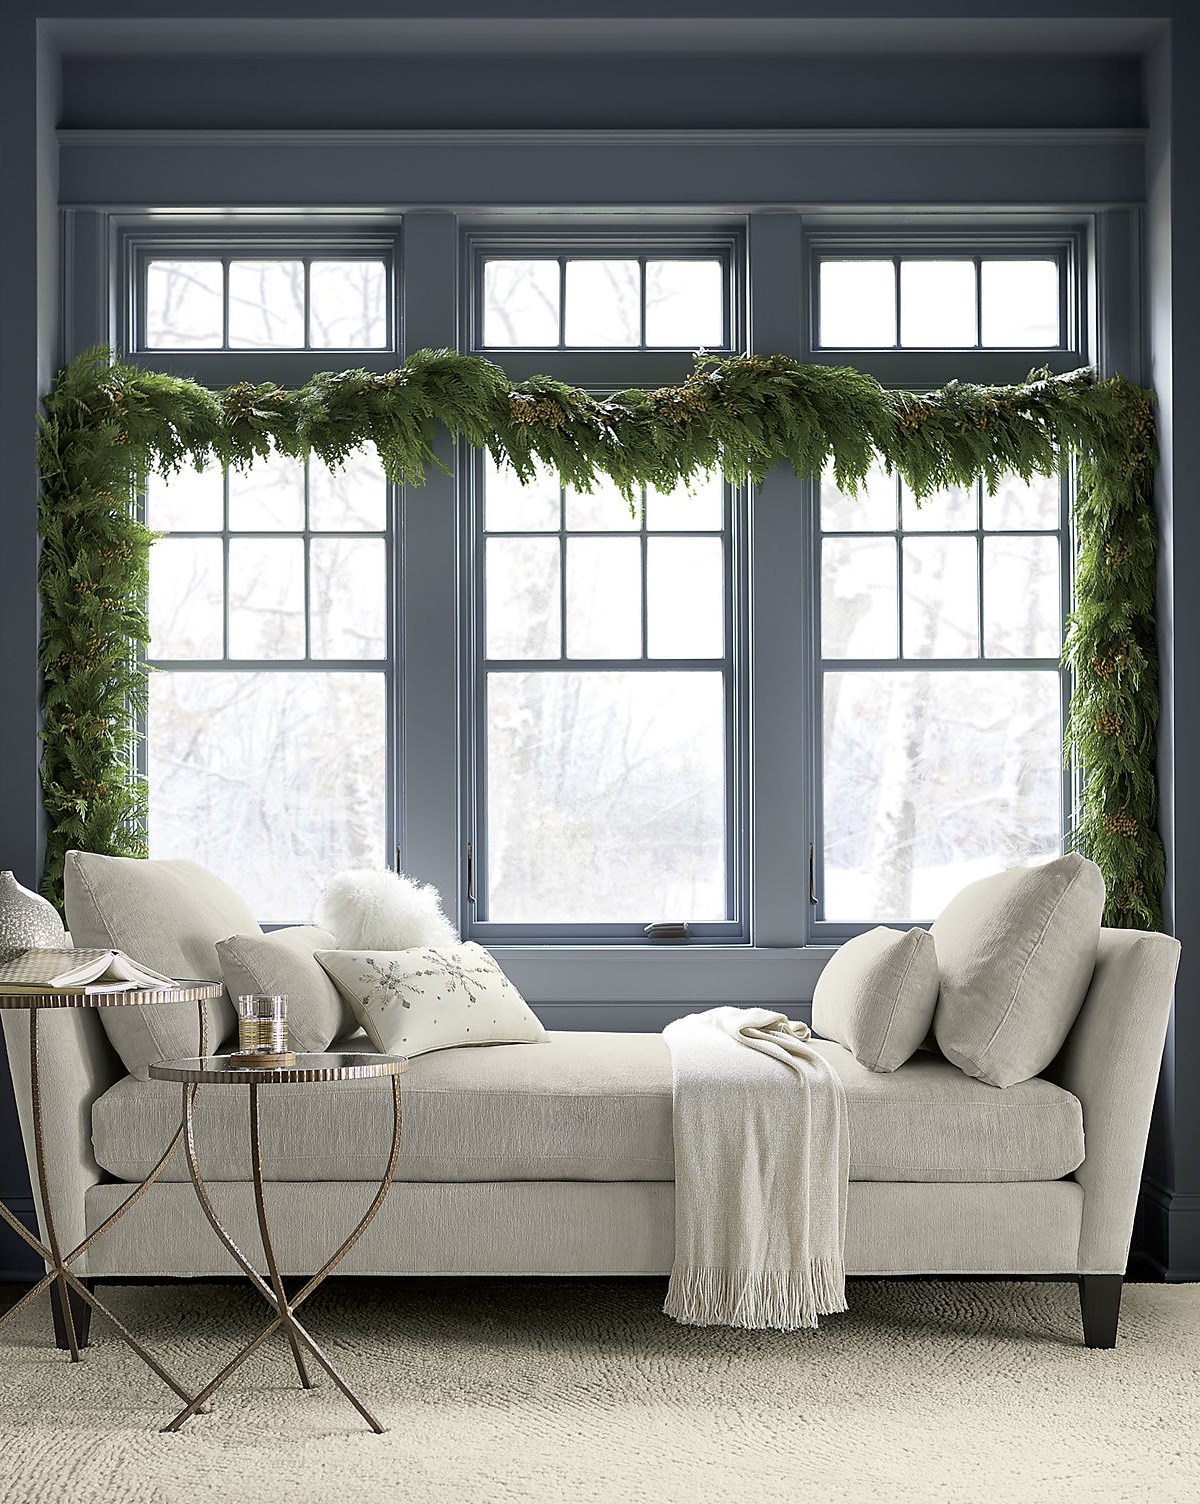 Holiday vignette from Crate & Barrel